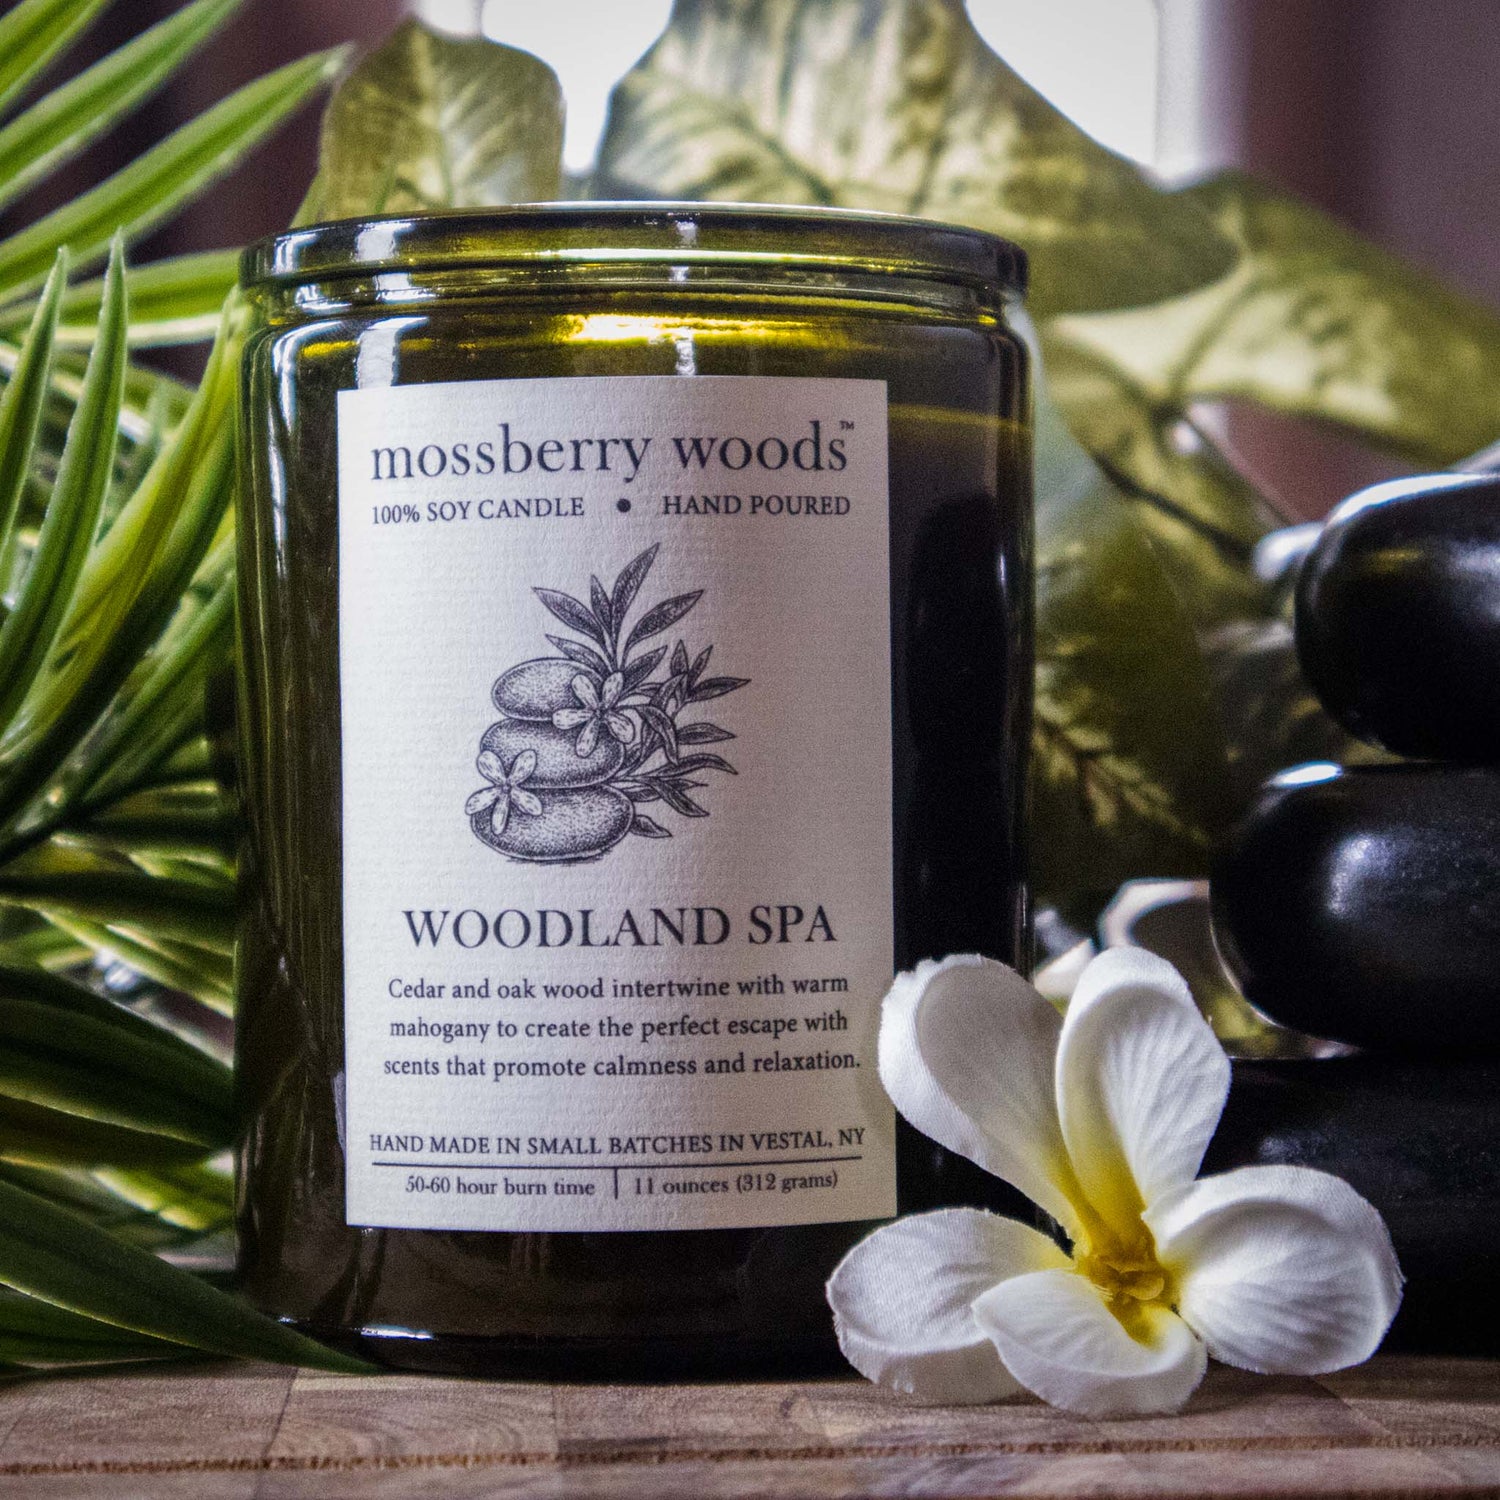 Woodsland Spa rustic soy candle with greenery